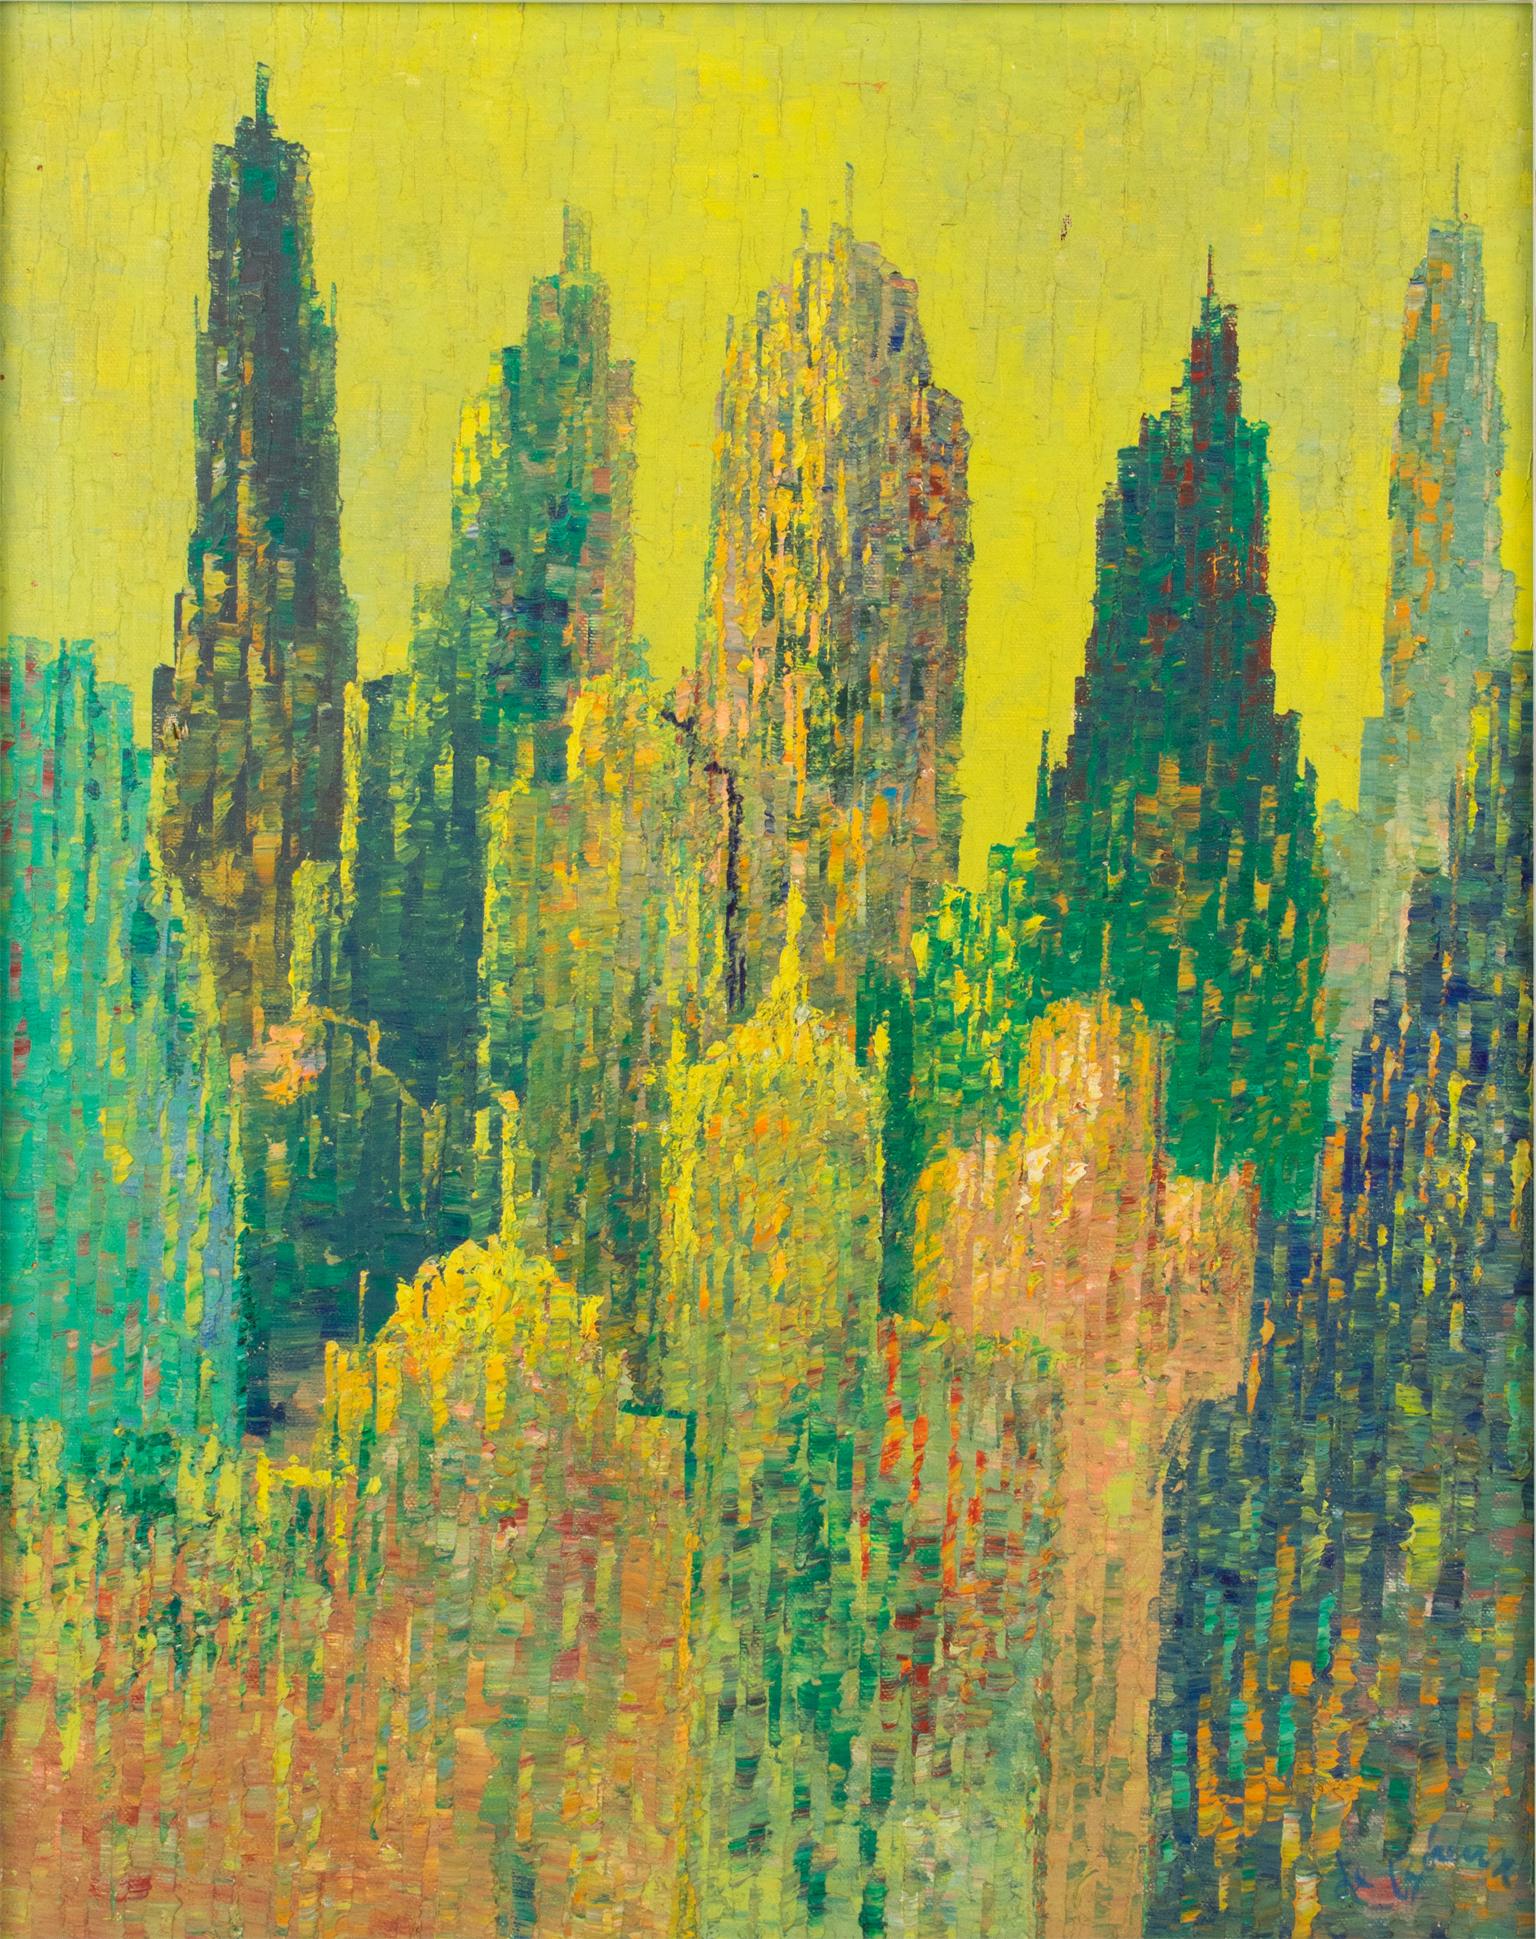 Pointillism Skyscrapers Cityscape Oil on Canvas Painting by Le Boreux For Sale 1